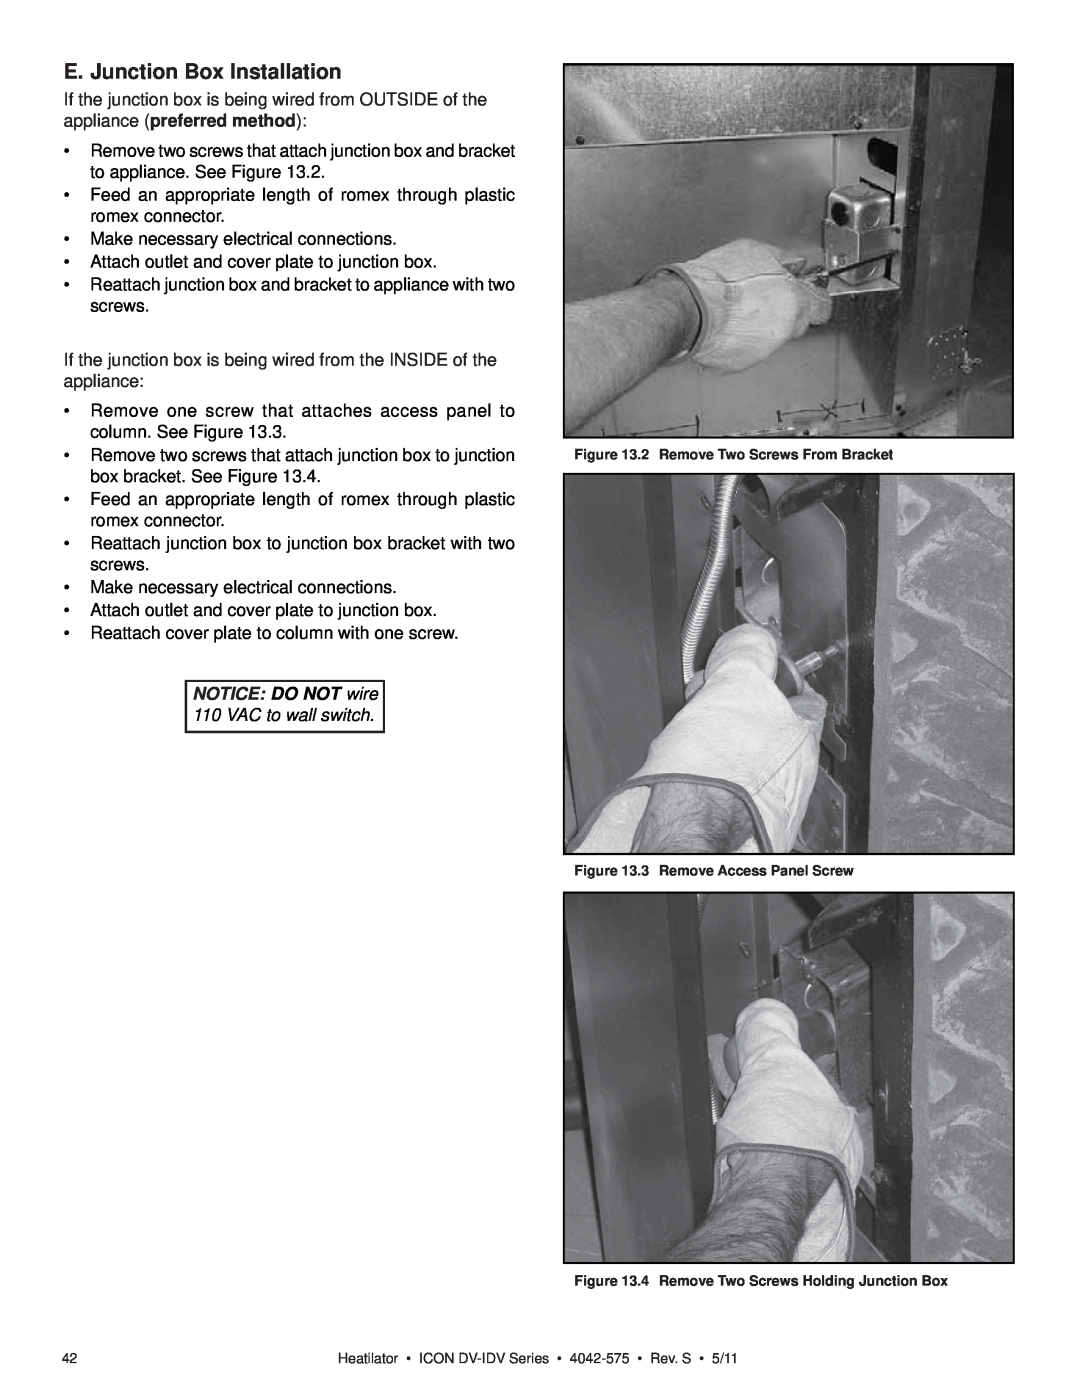 Heatiator IDV4833IT owner manual E. Junction Box Installation, NOTICE: DO NOT wire 110 VAC to wall switch 